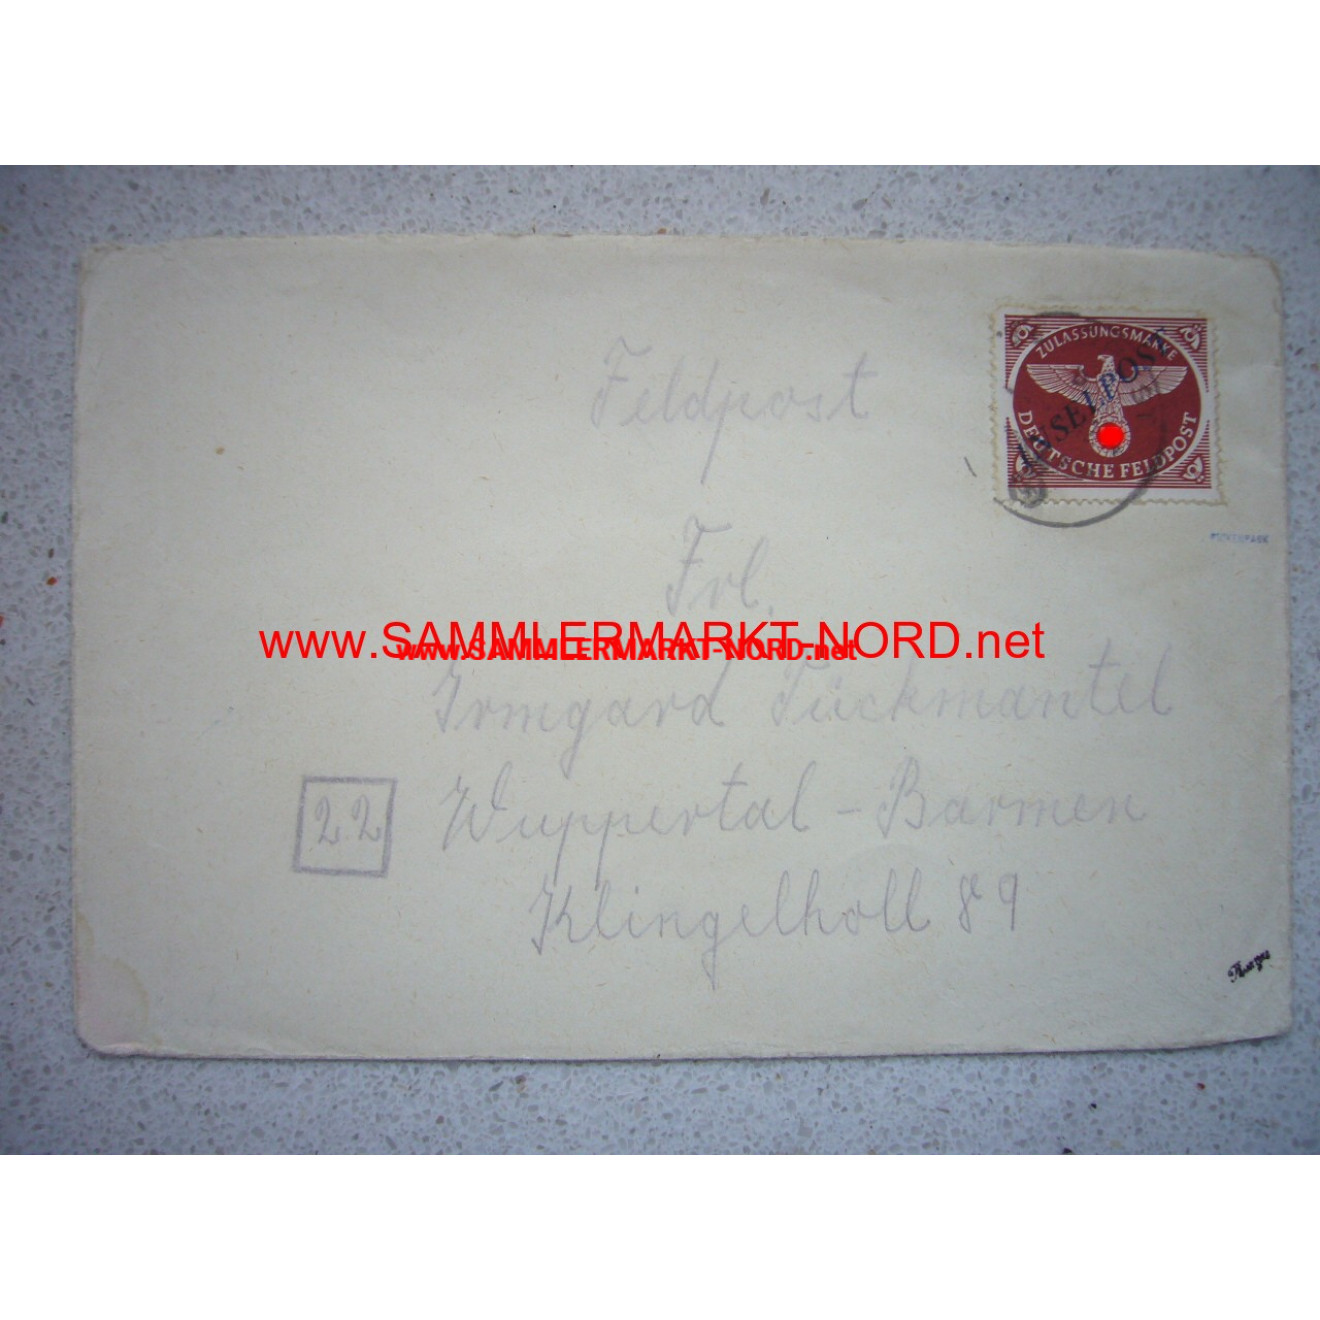 Island field mail with approval stamp with overprint "Inselpost"